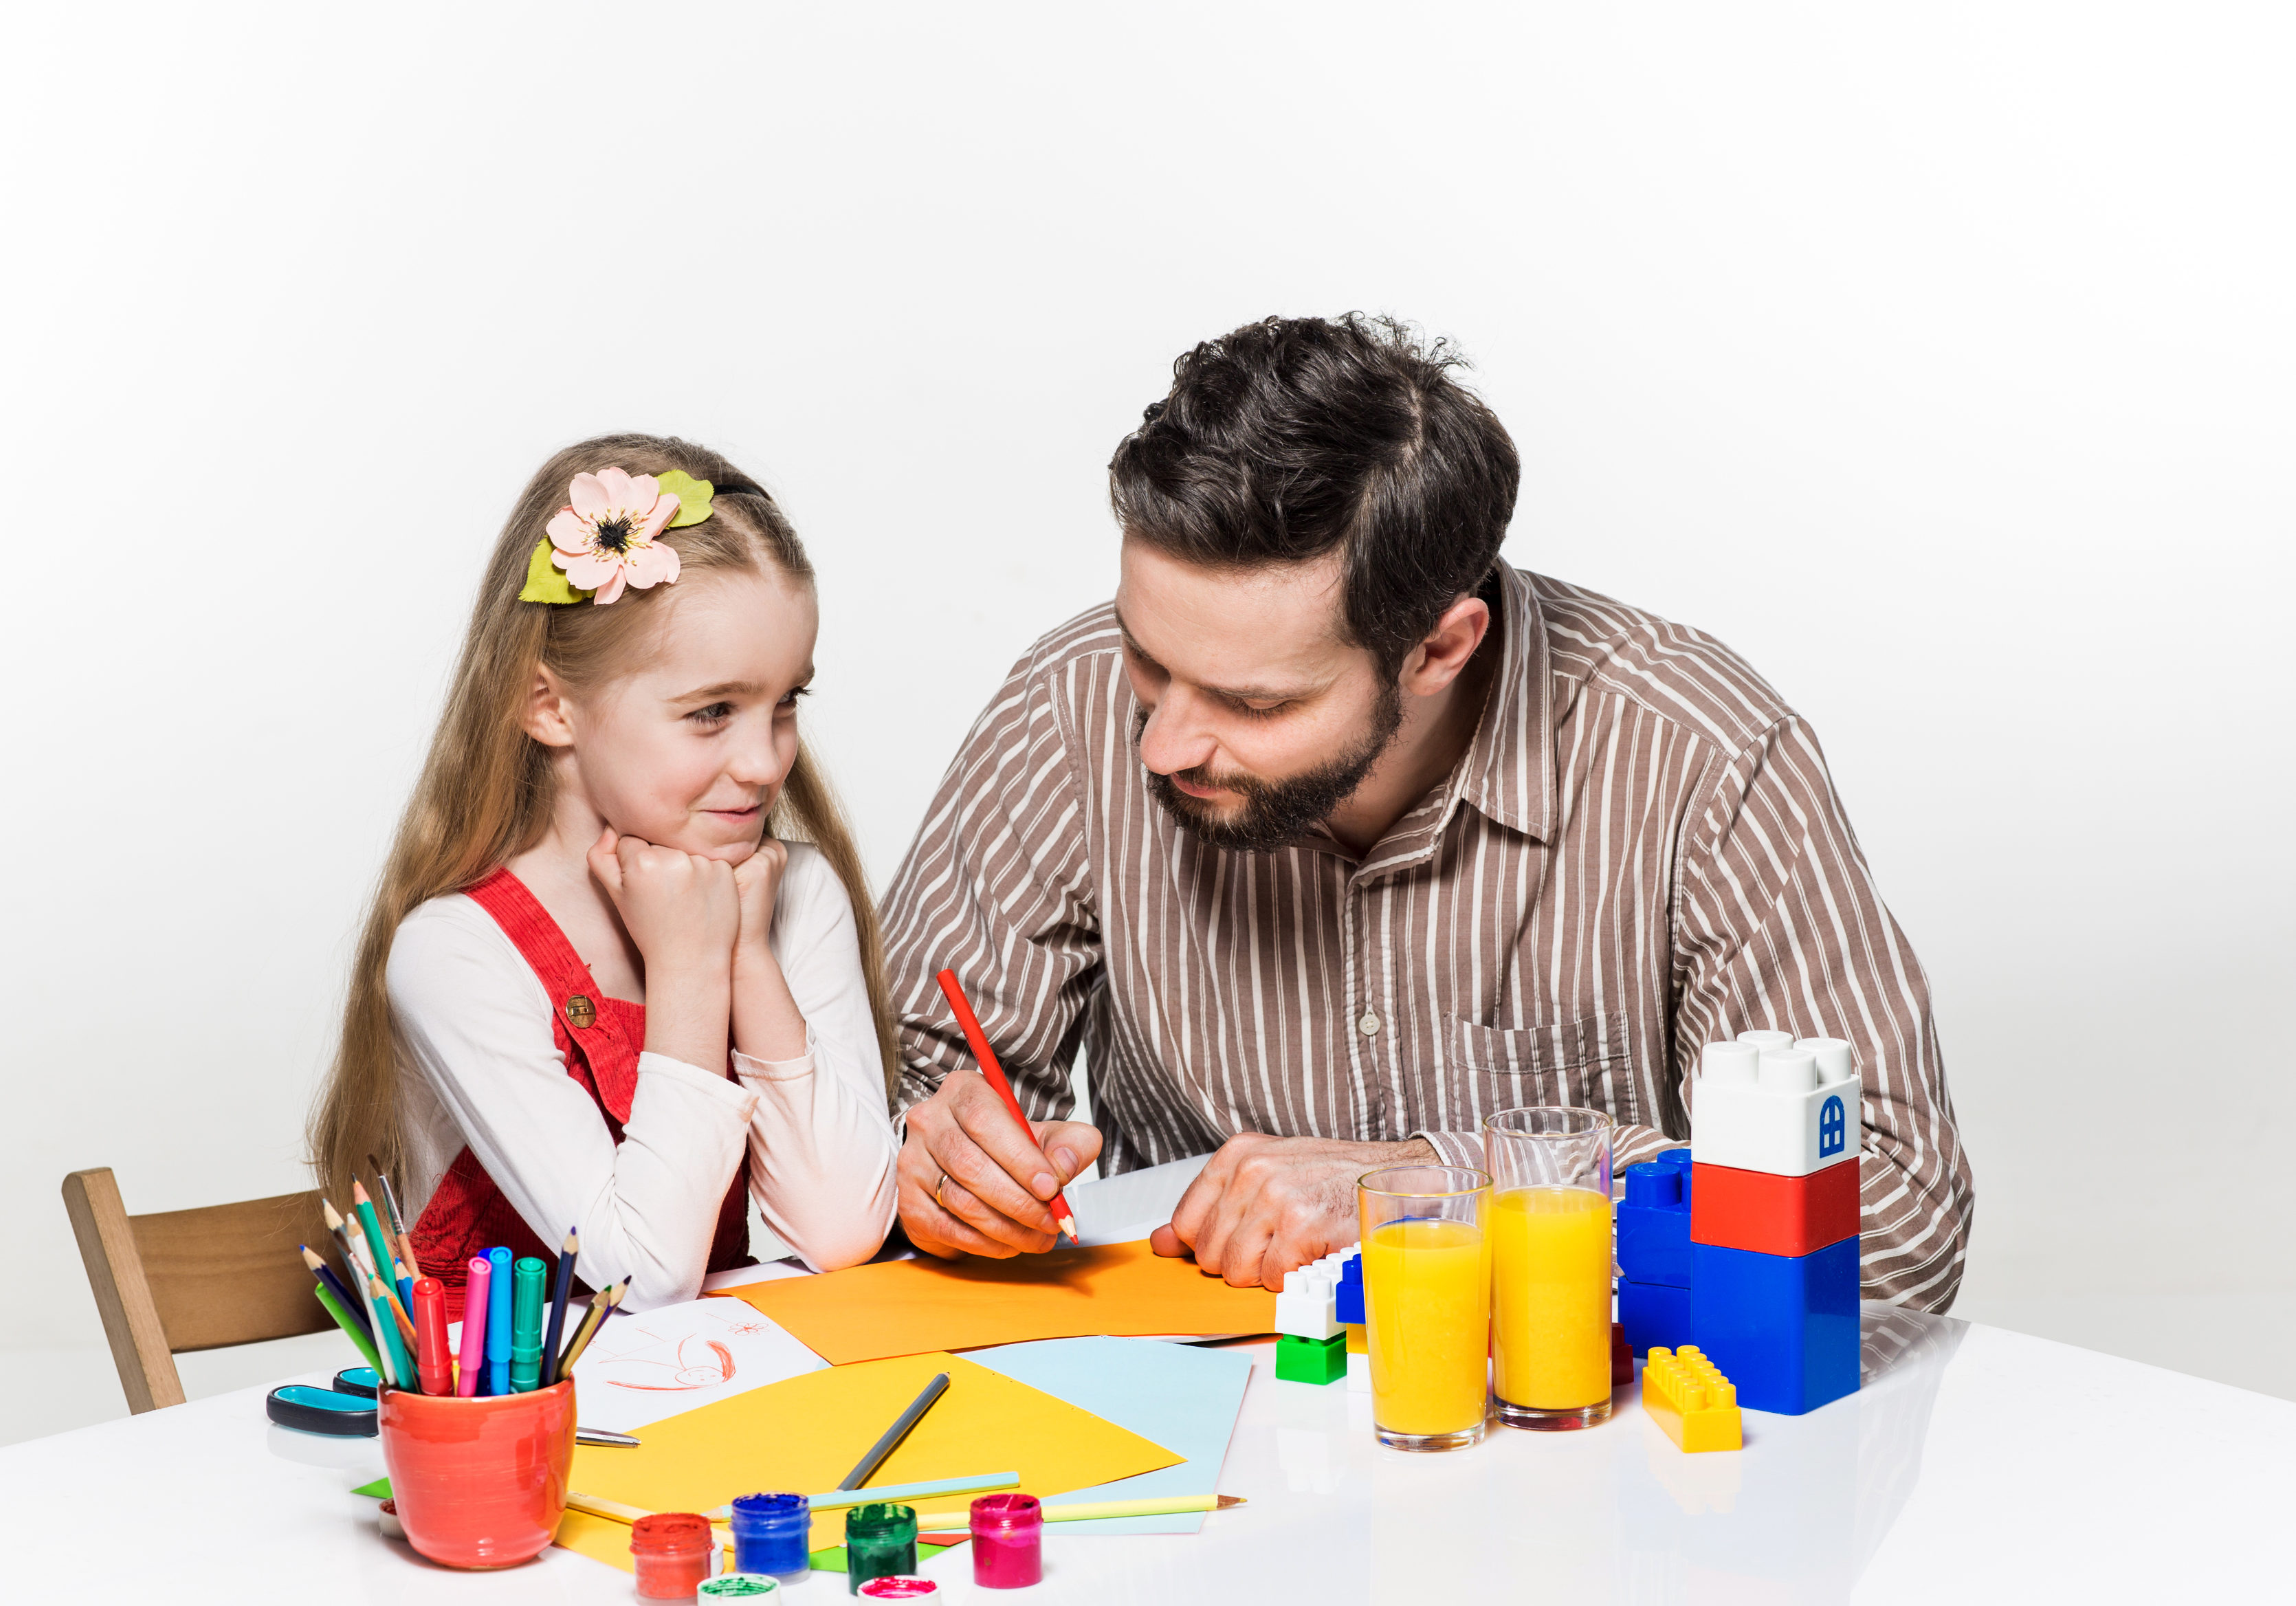 The daughter and father drawing and writing together on white background